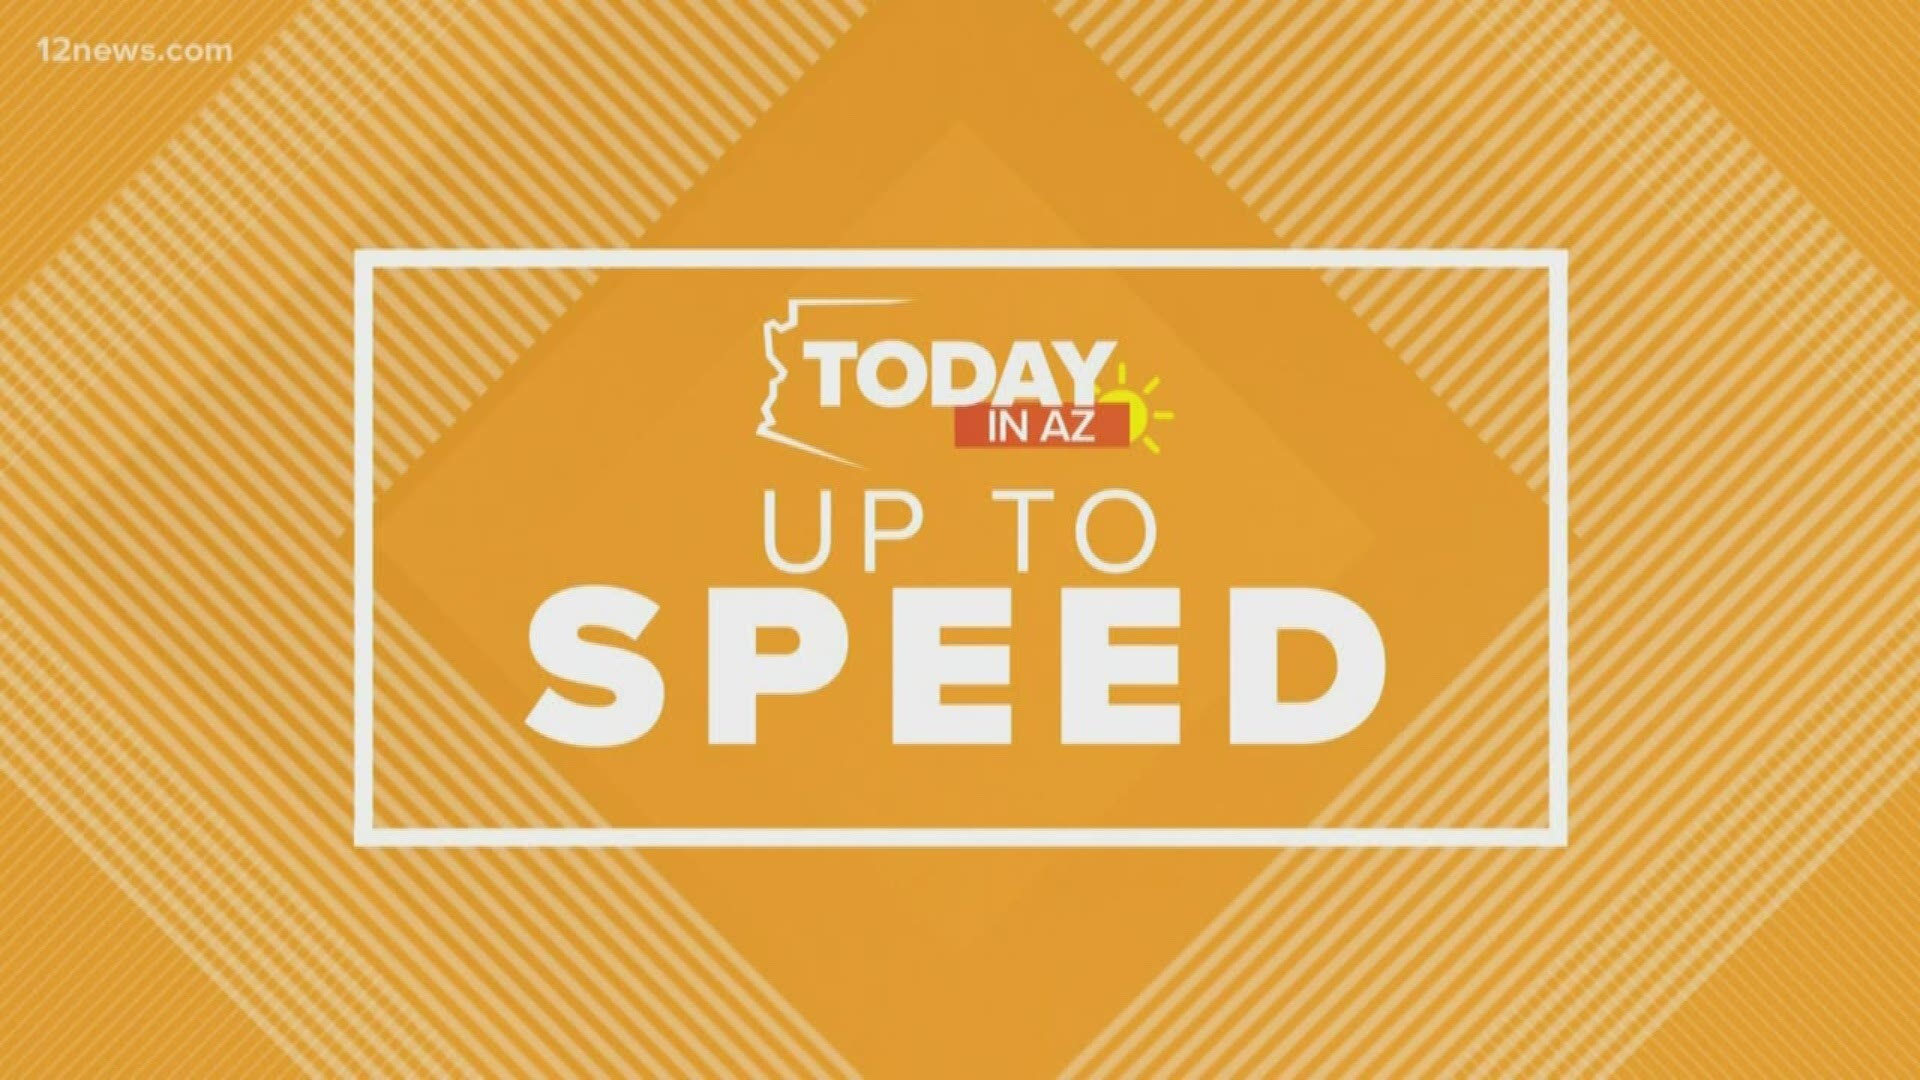 We get you "Up to Speed" on the latest news happening around the Valley and across the nation on Tuesday morning.